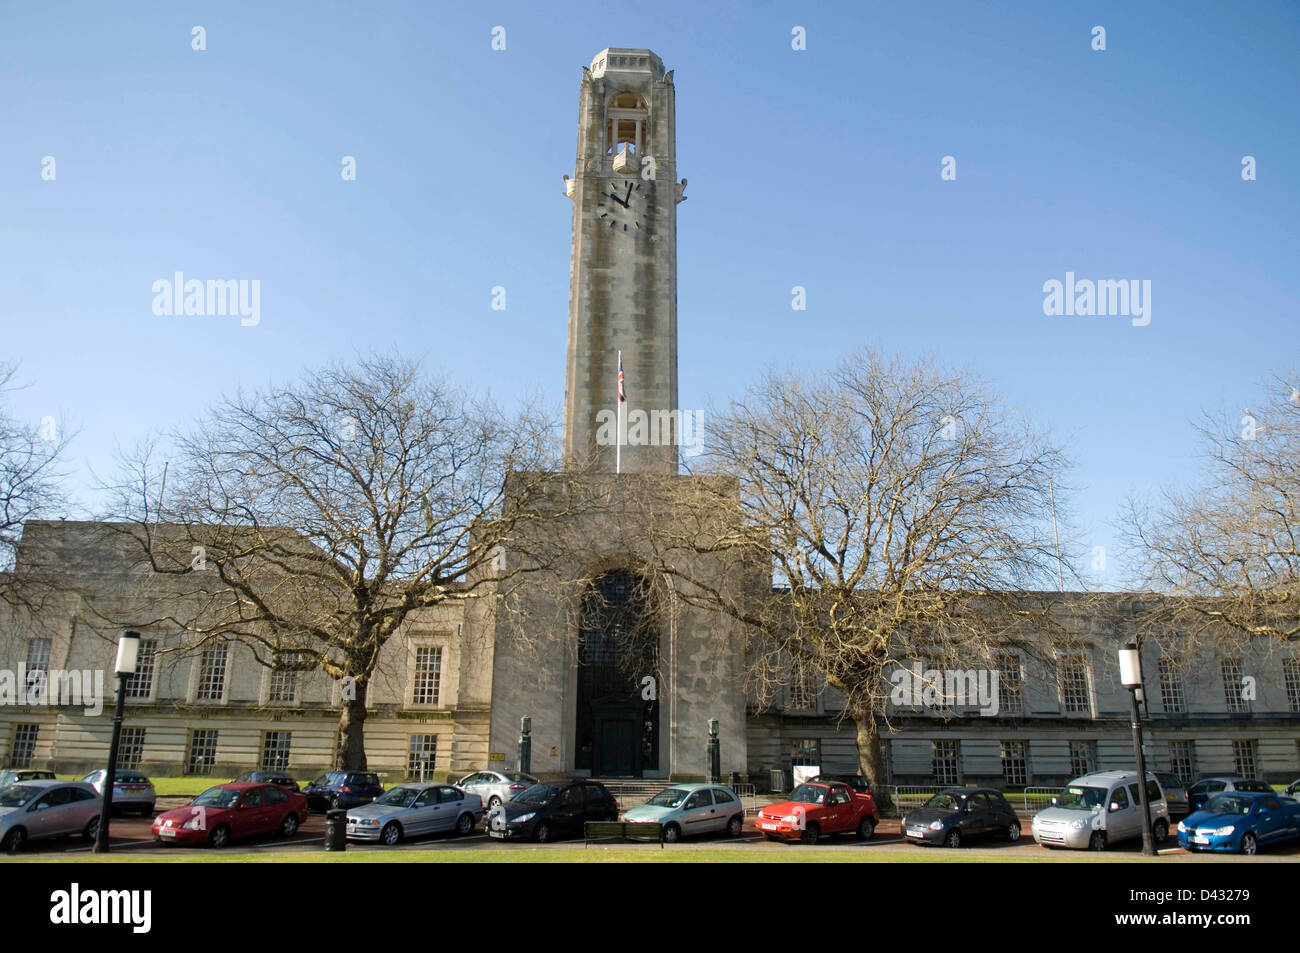 The Brangywn Hall in Swansea, South Wales, UK. Stock Photo